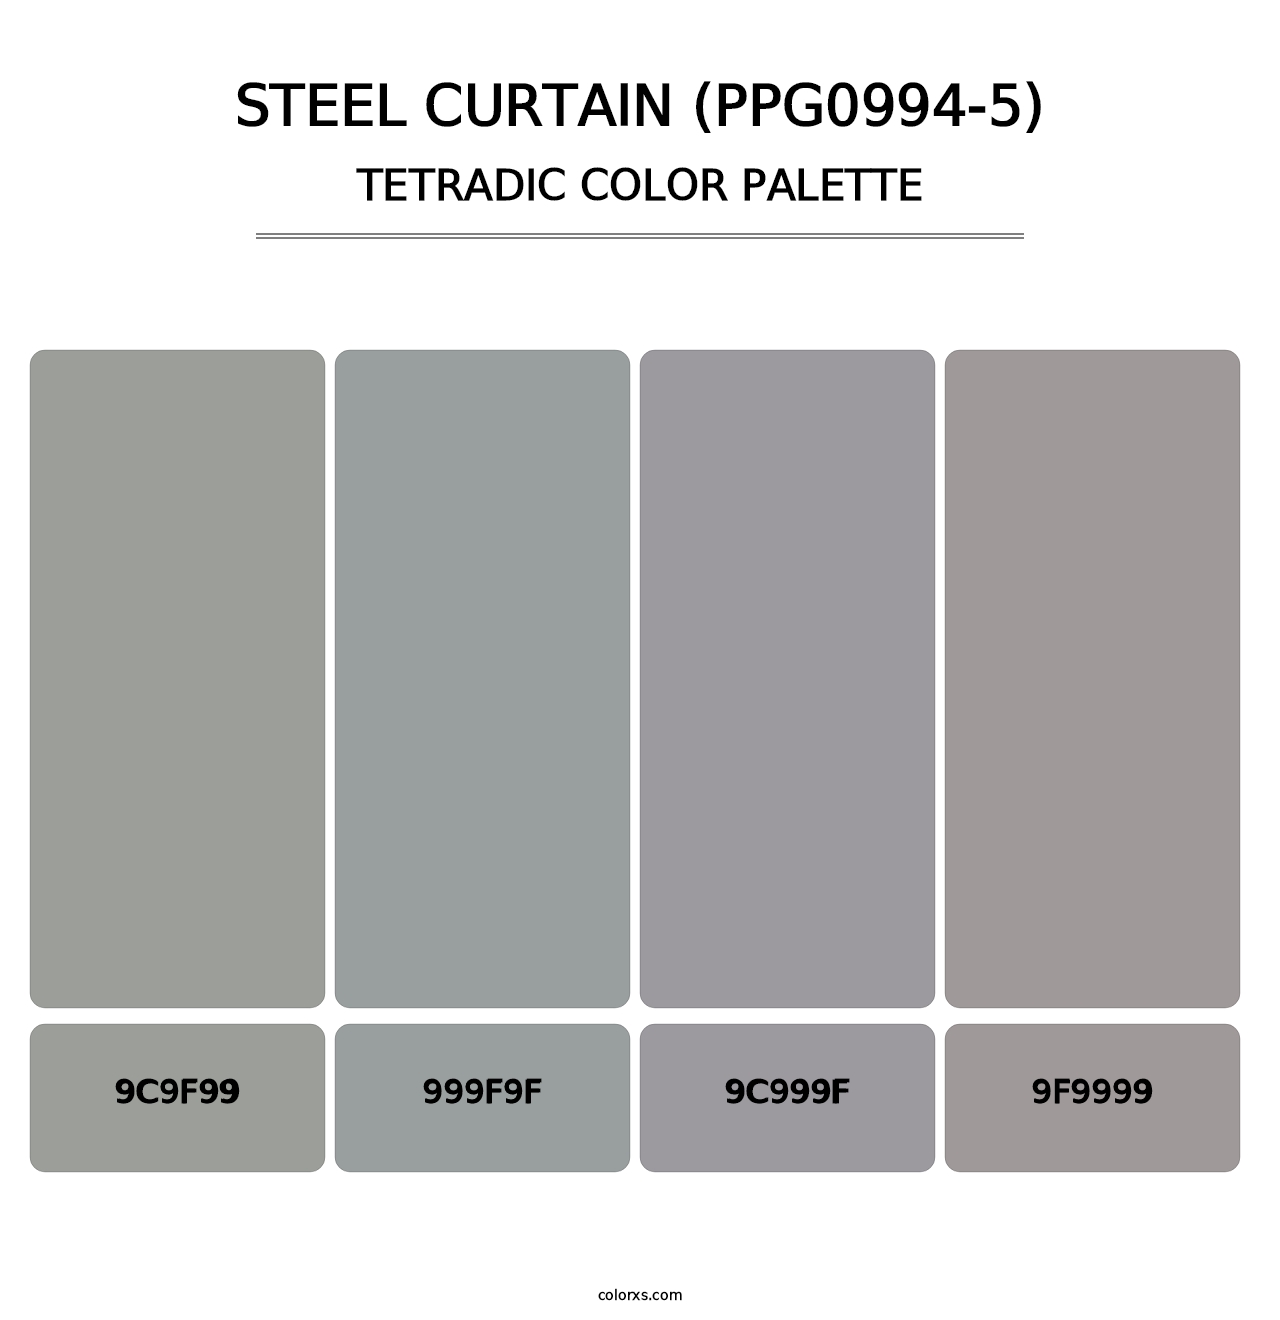 Steel Curtain (PPG0994-5) - Tetradic Color Palette